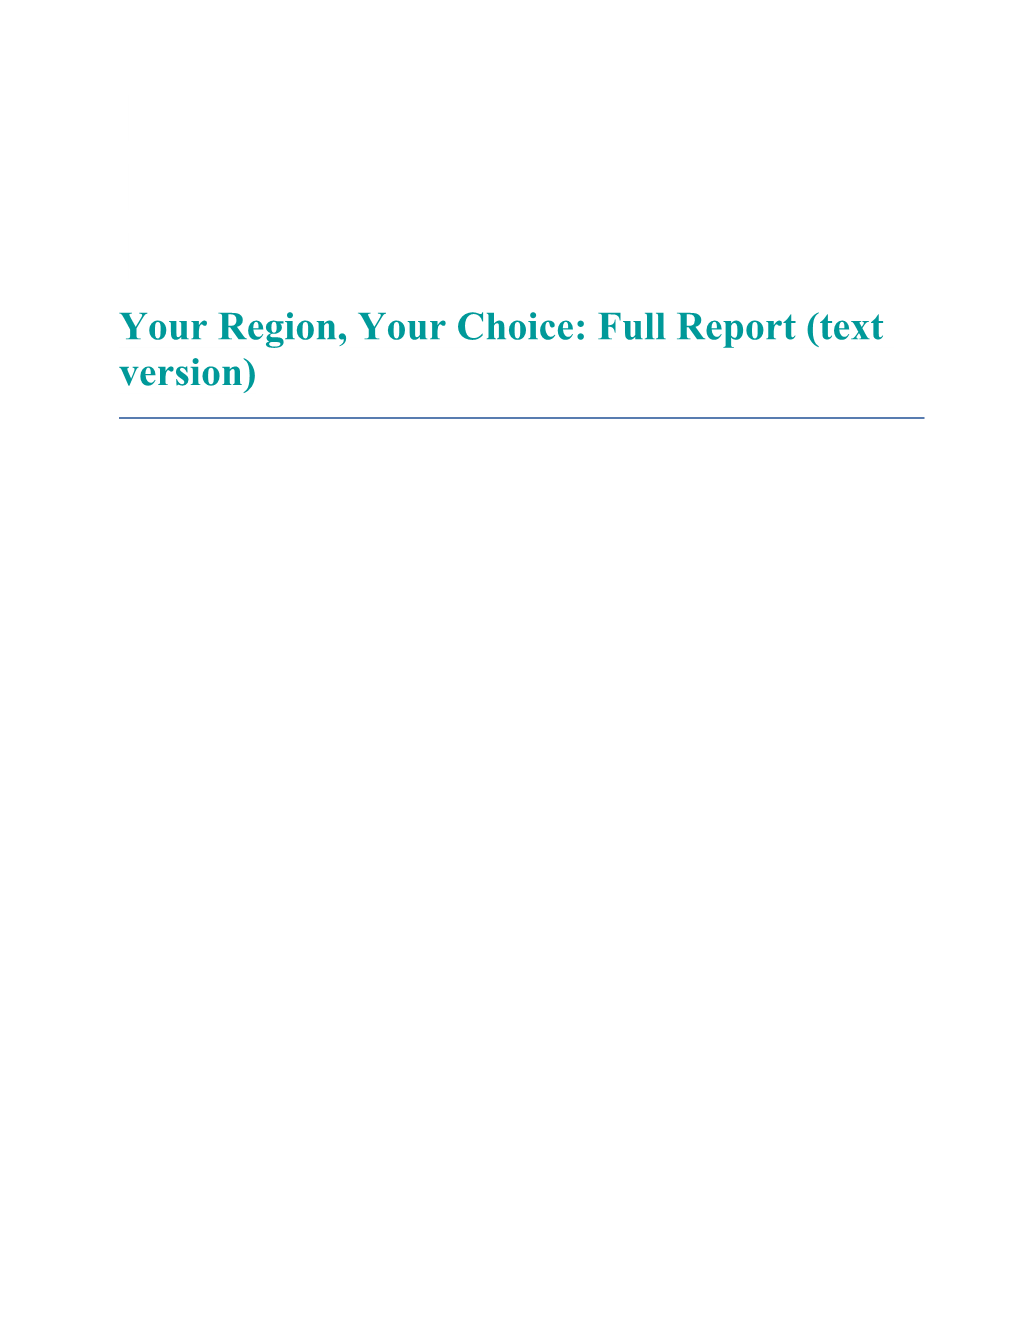 Your Region, Your Choice: Full Report (Text Version)